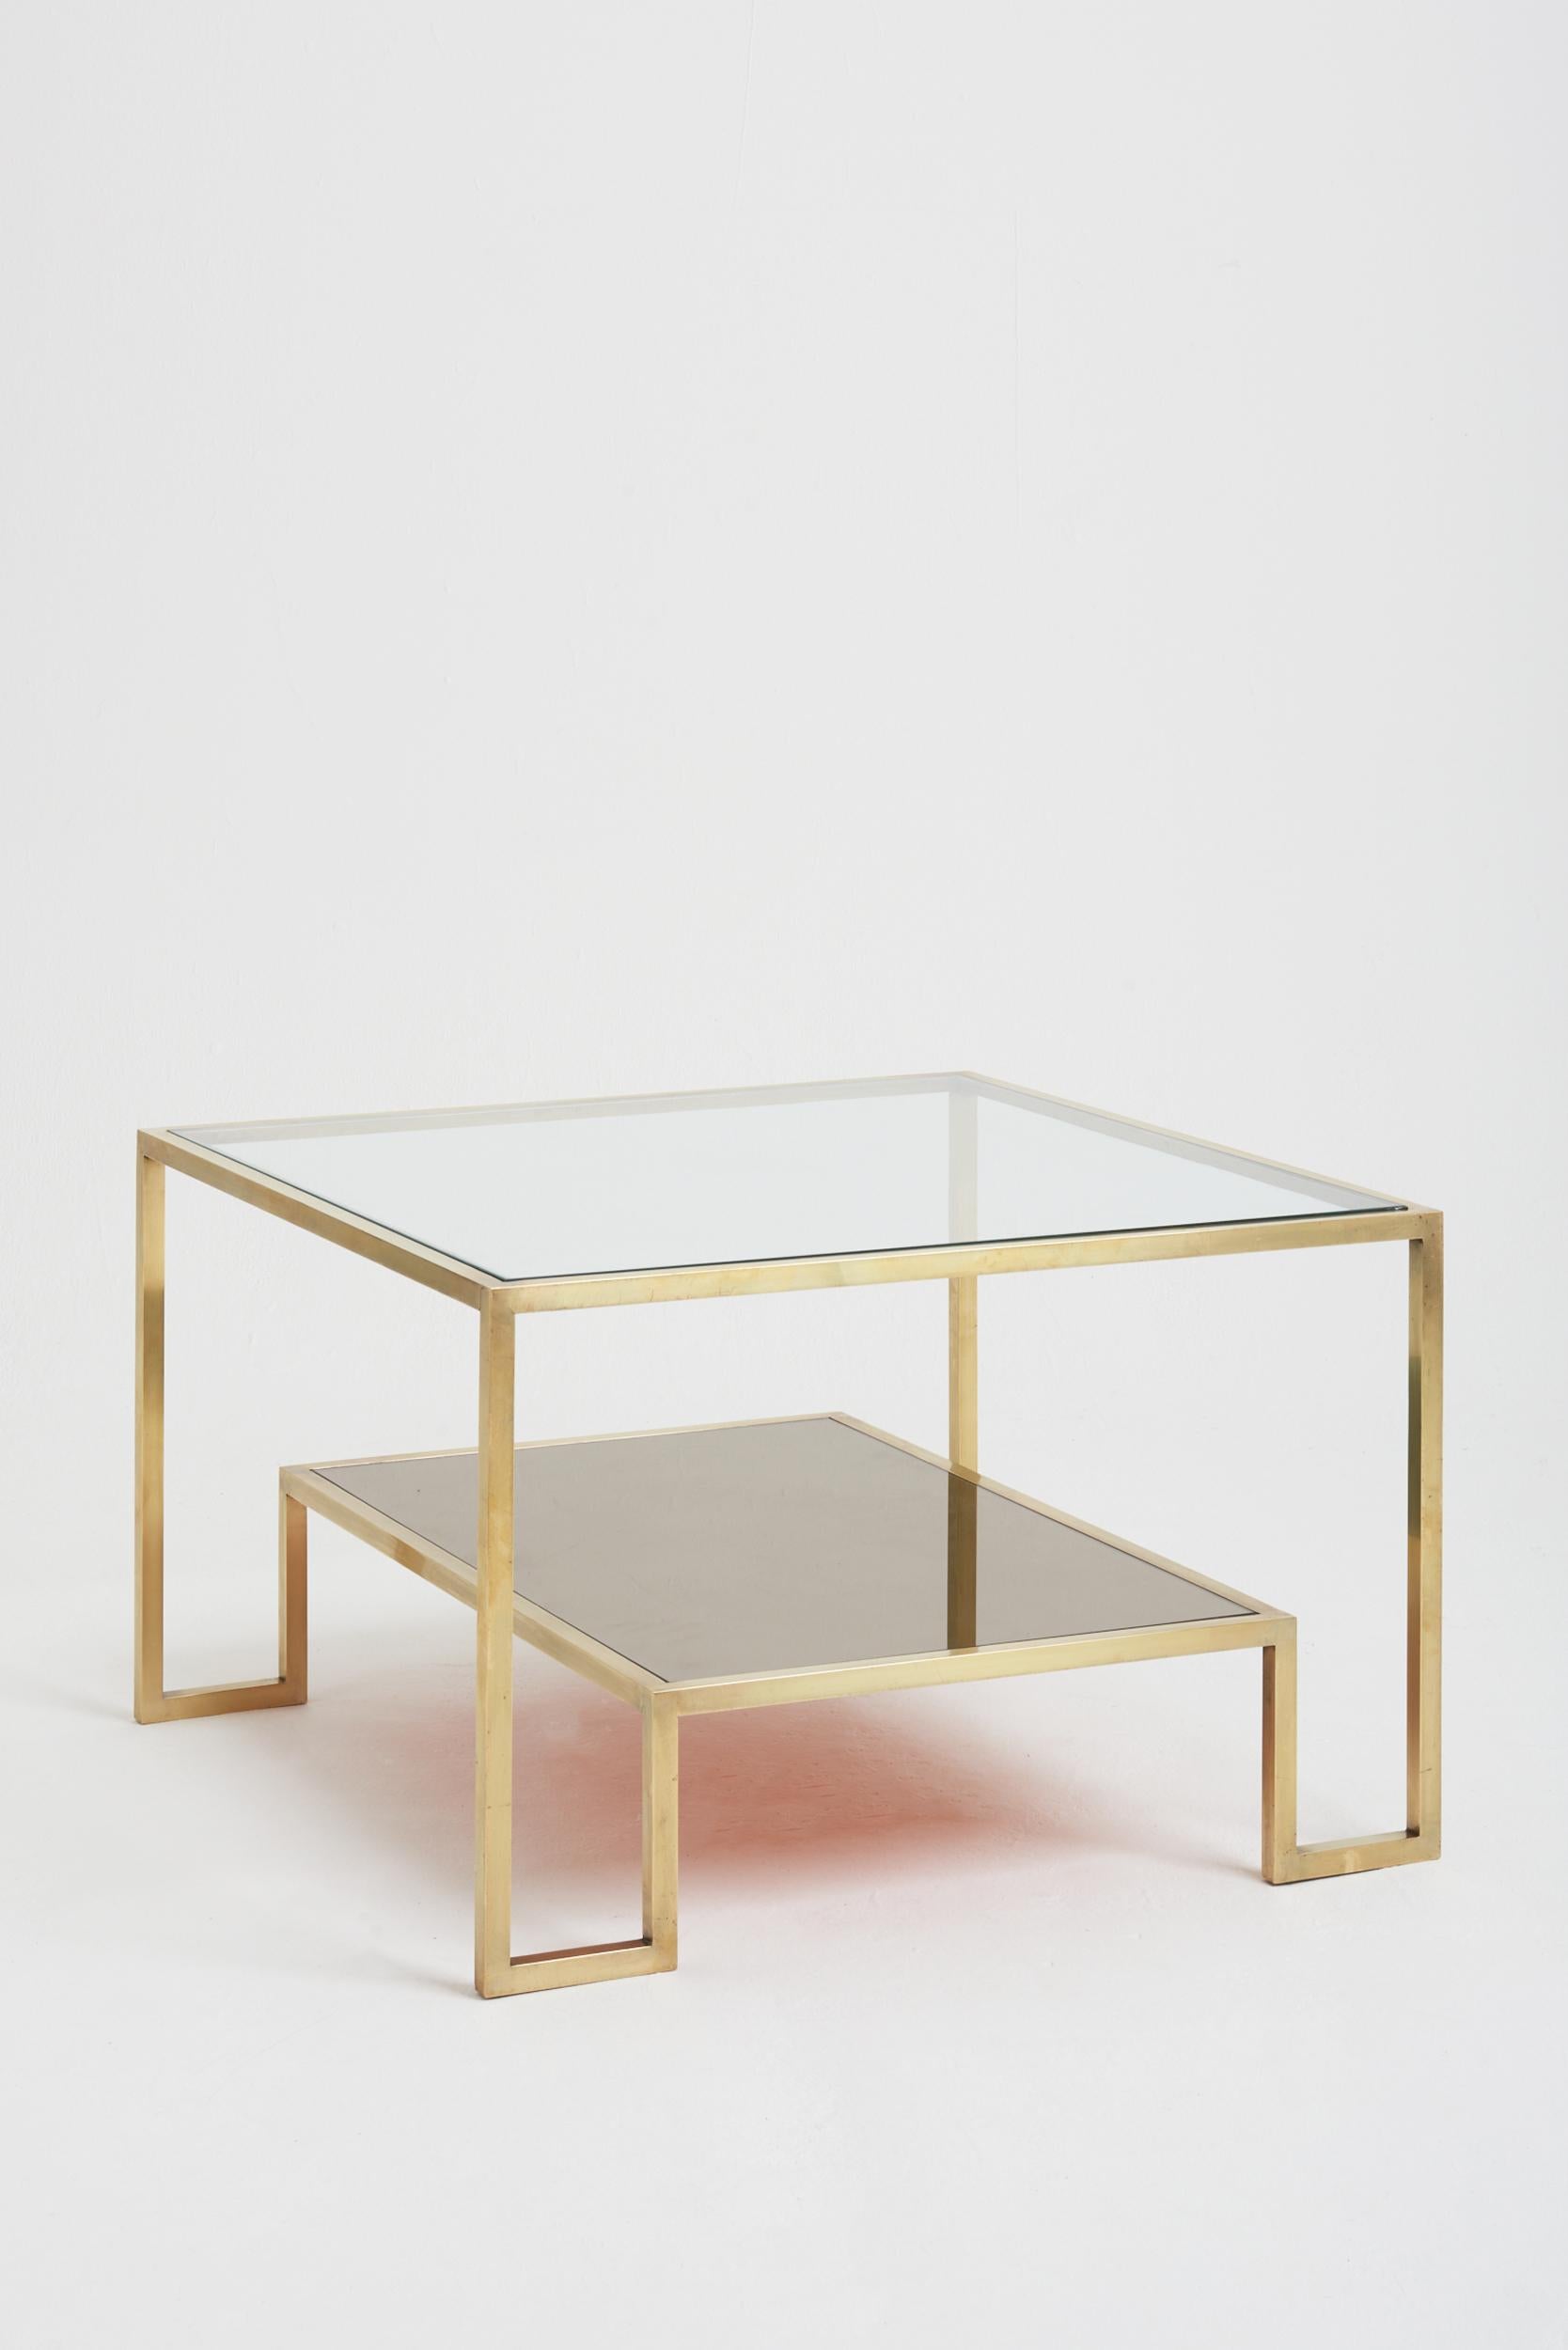 A brass two-tiered square coffee table, glass top and mirrord lower tier.
France, Circa 1970.